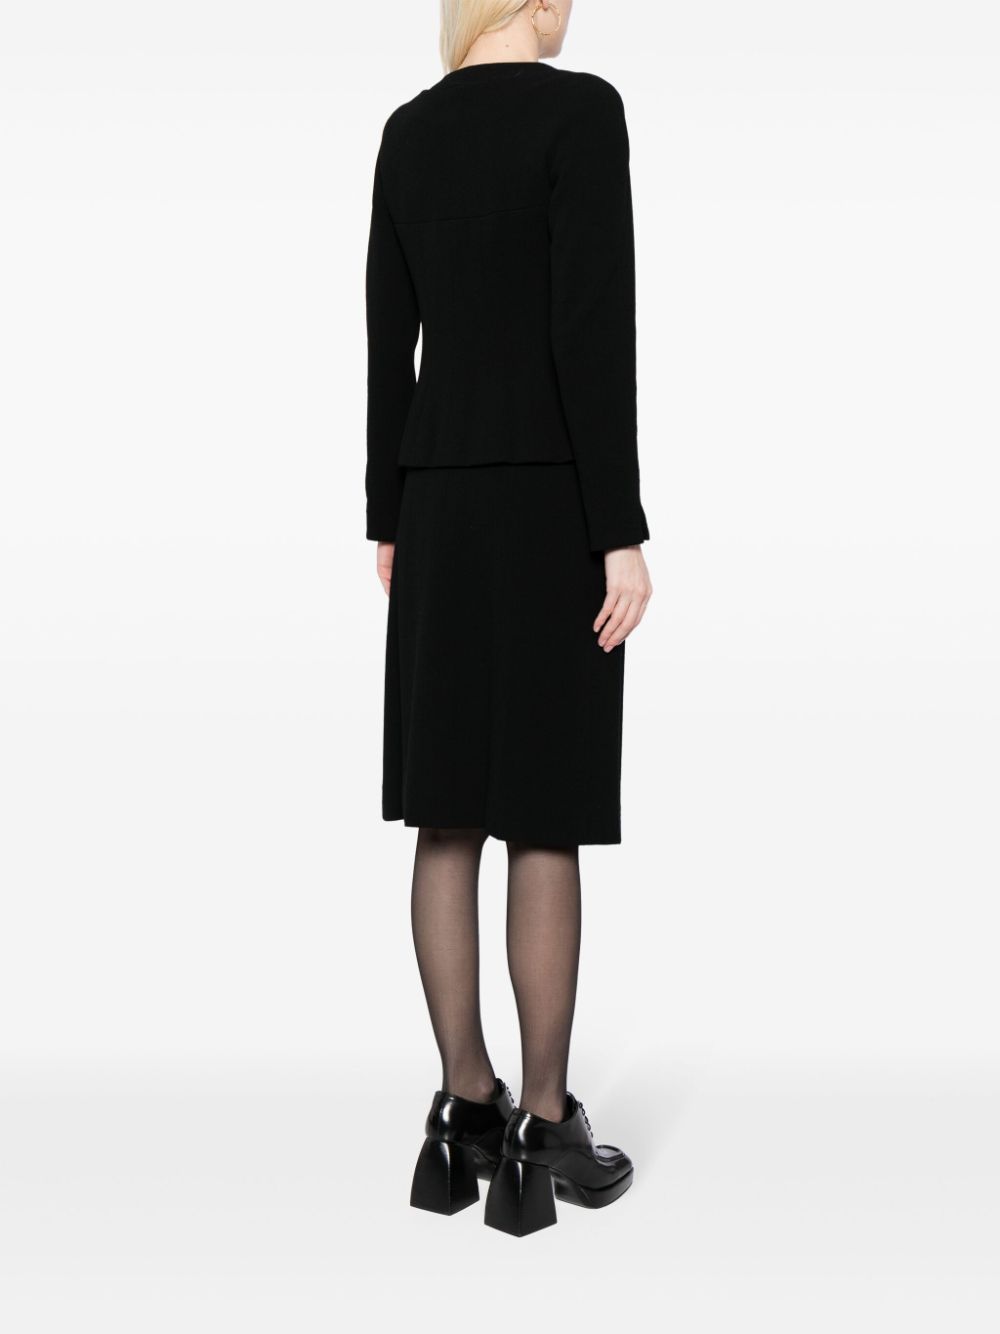 Pre-owned Chanel 2002 Single-breasted Wool Skirt Suit In Black